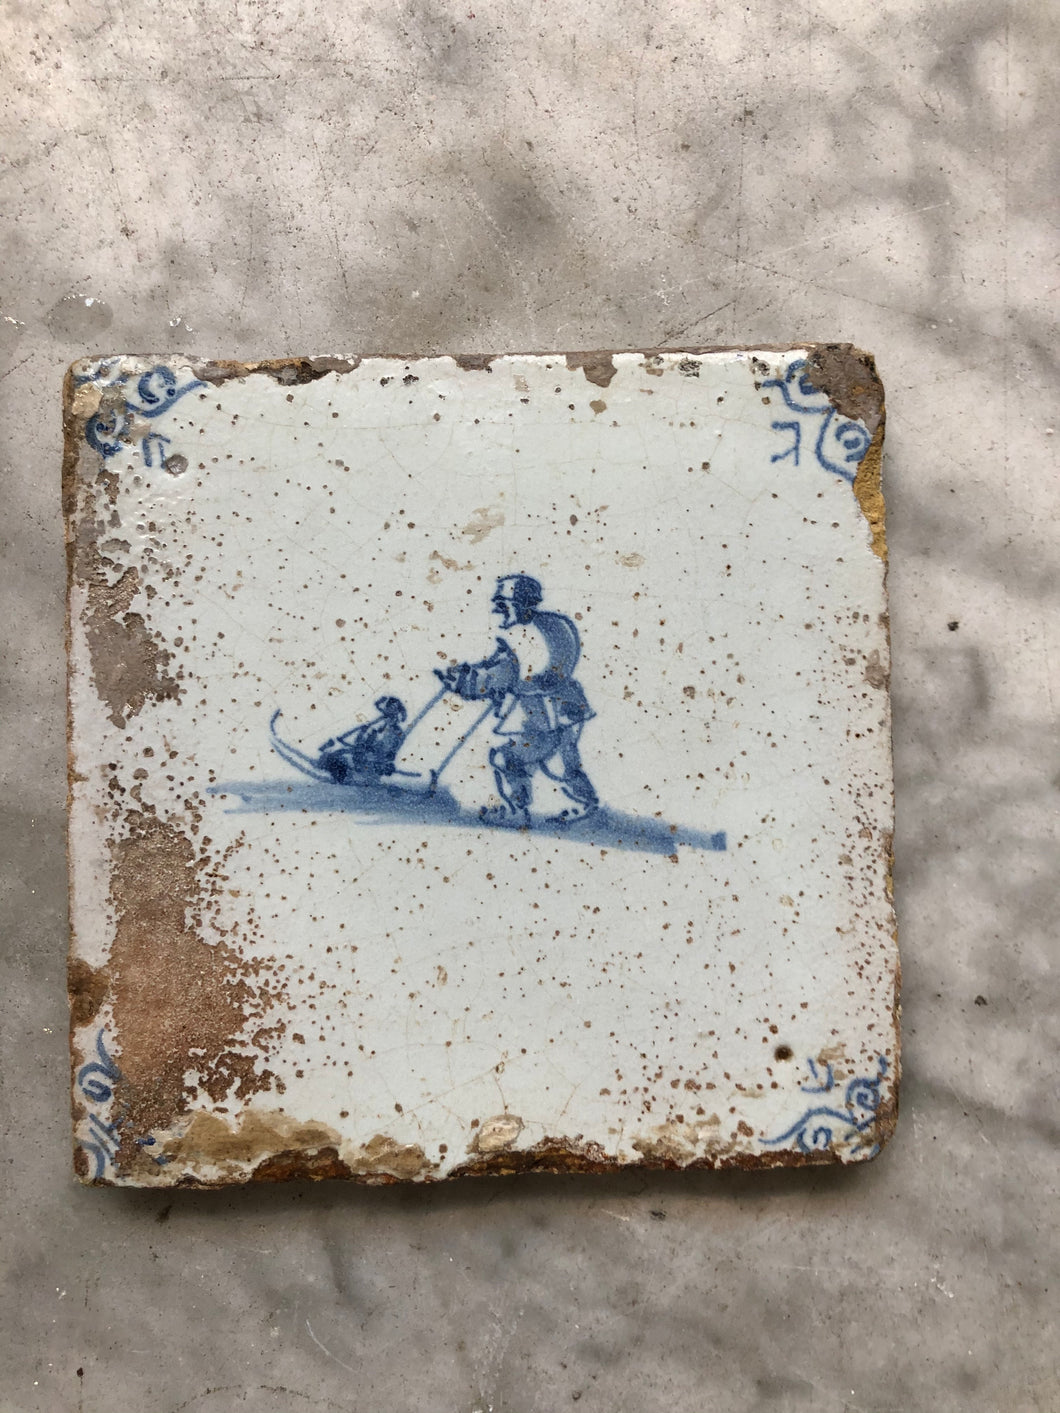 17 th century delft tile with skaters